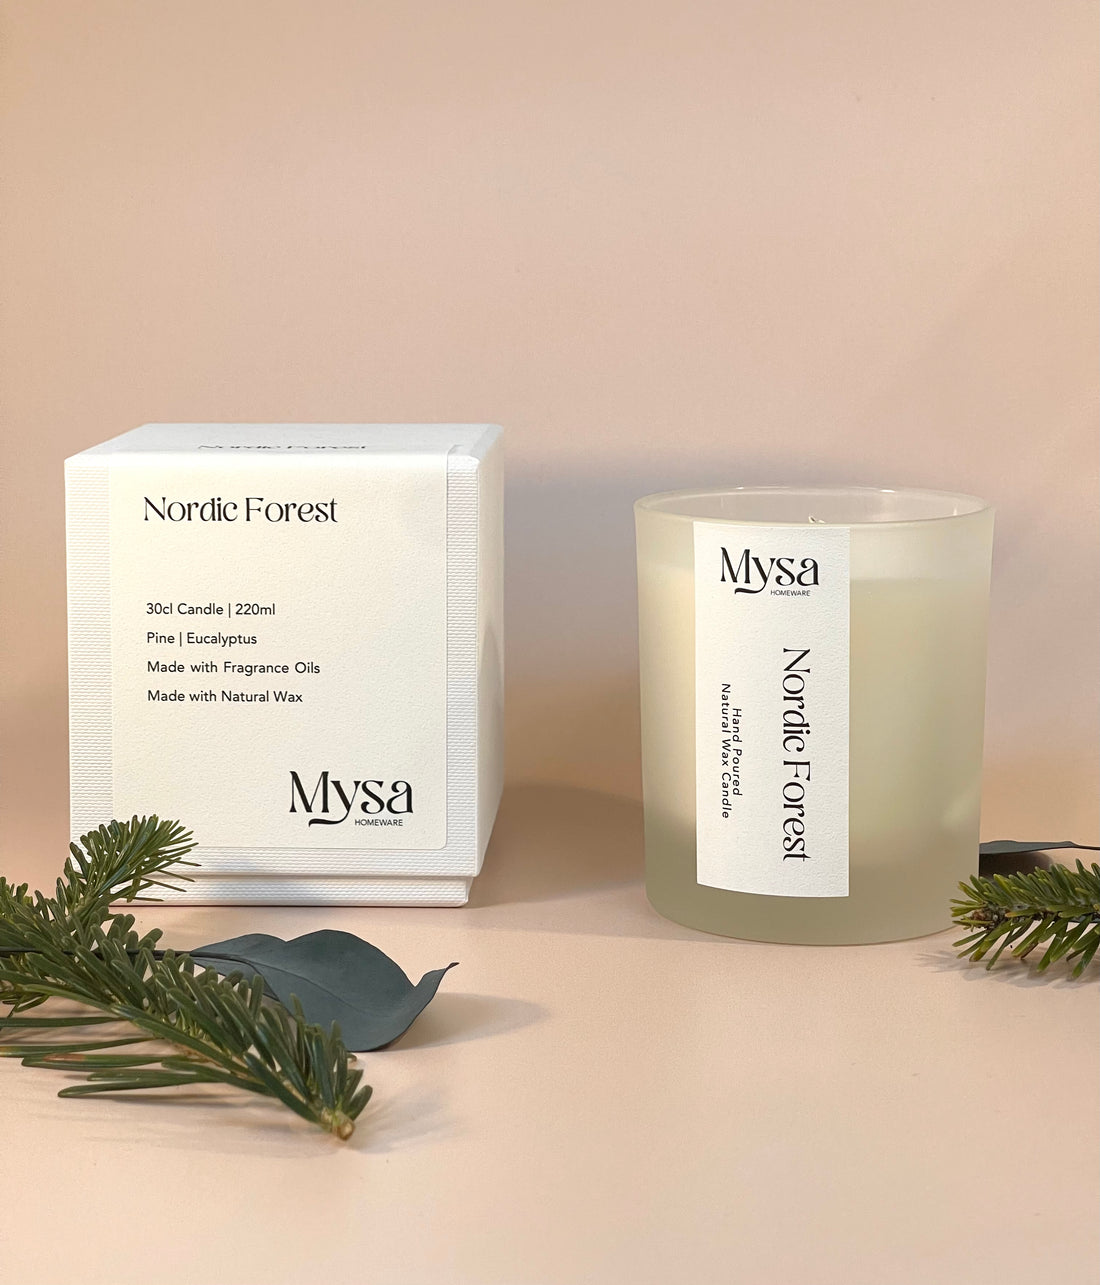 Nordic Forest luxury scented candle in gift box, with natural wax and pine and eucalyptus fragrance.